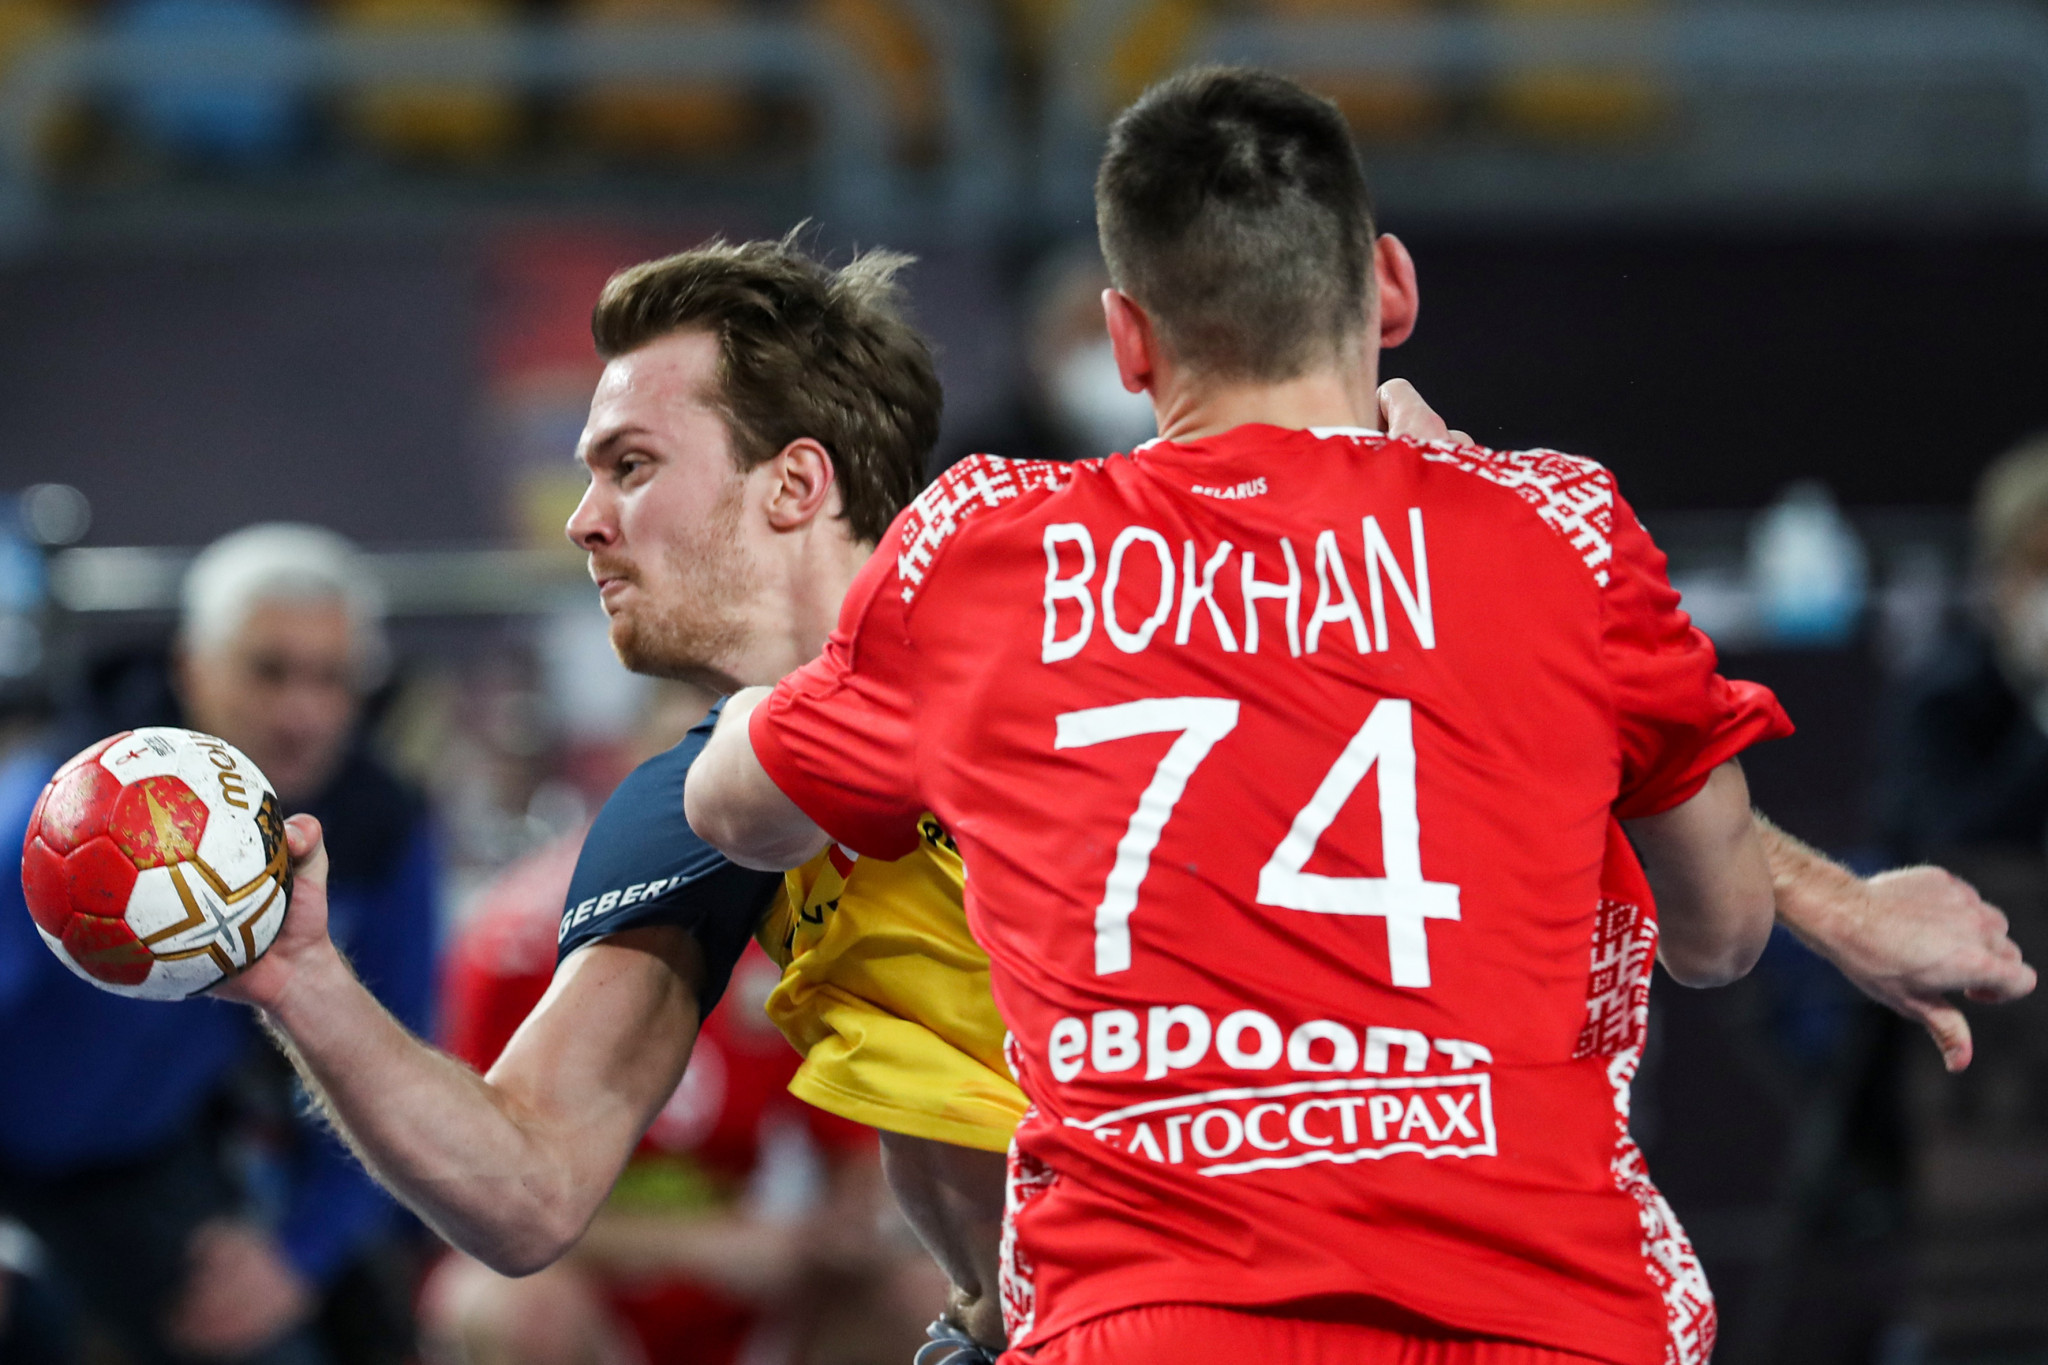 Belarus (playing in red) snatched a draw against Sweden with four seconds to go on the first day of main round action at the World Men's Handball Championship ©Getty Images